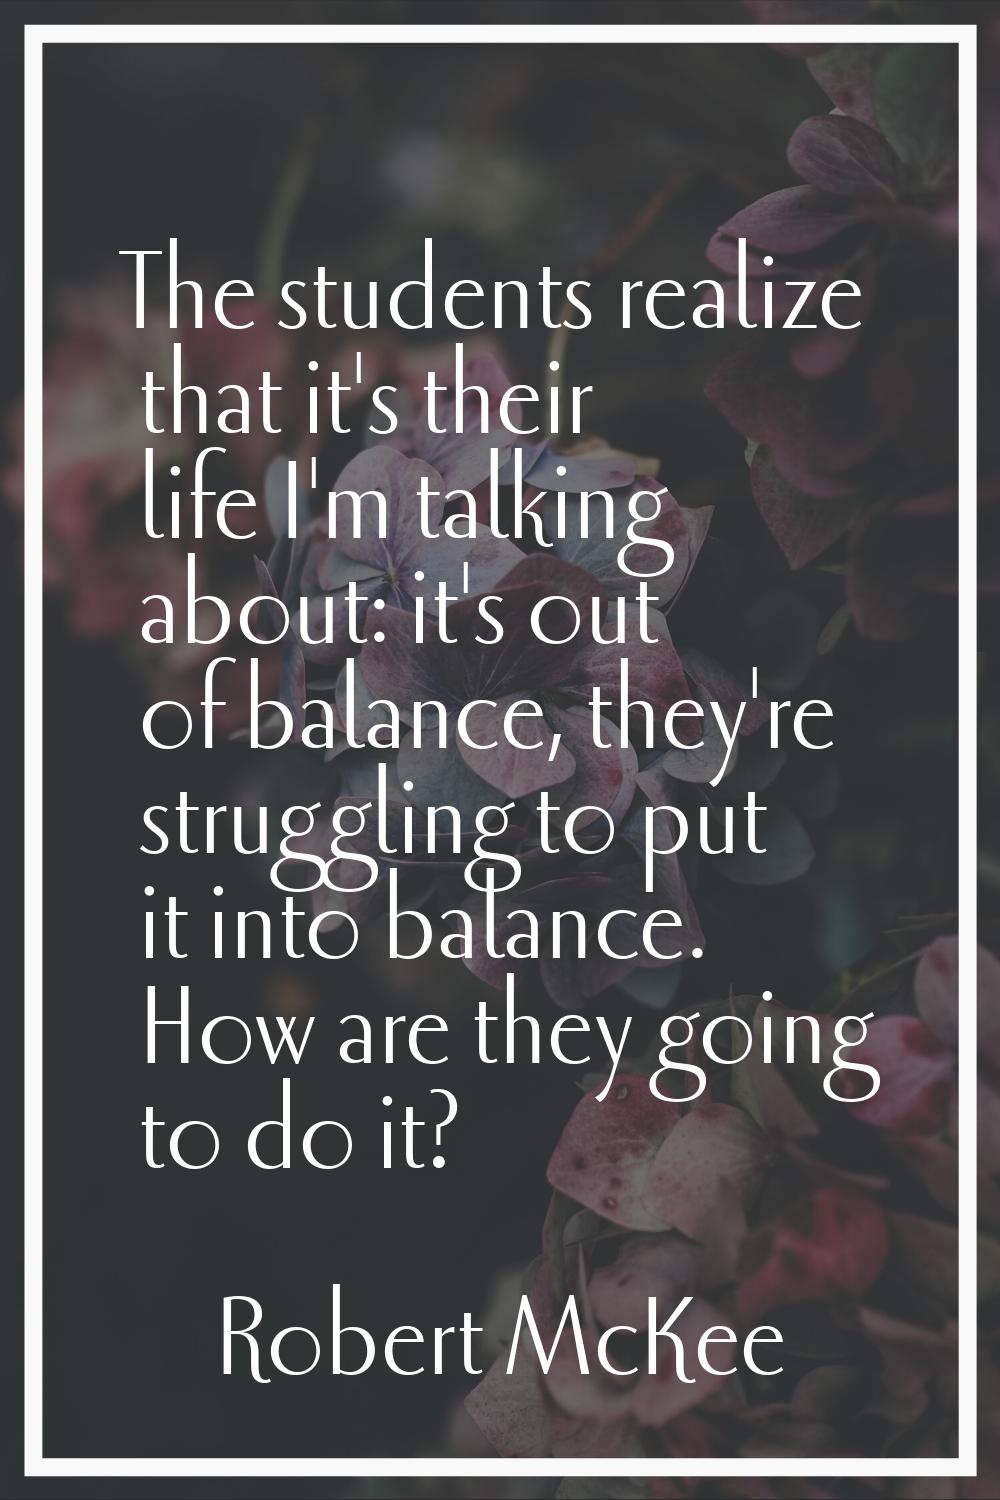 The students realize that it's their life I'm talking about: it's out of balance, they're strugglin